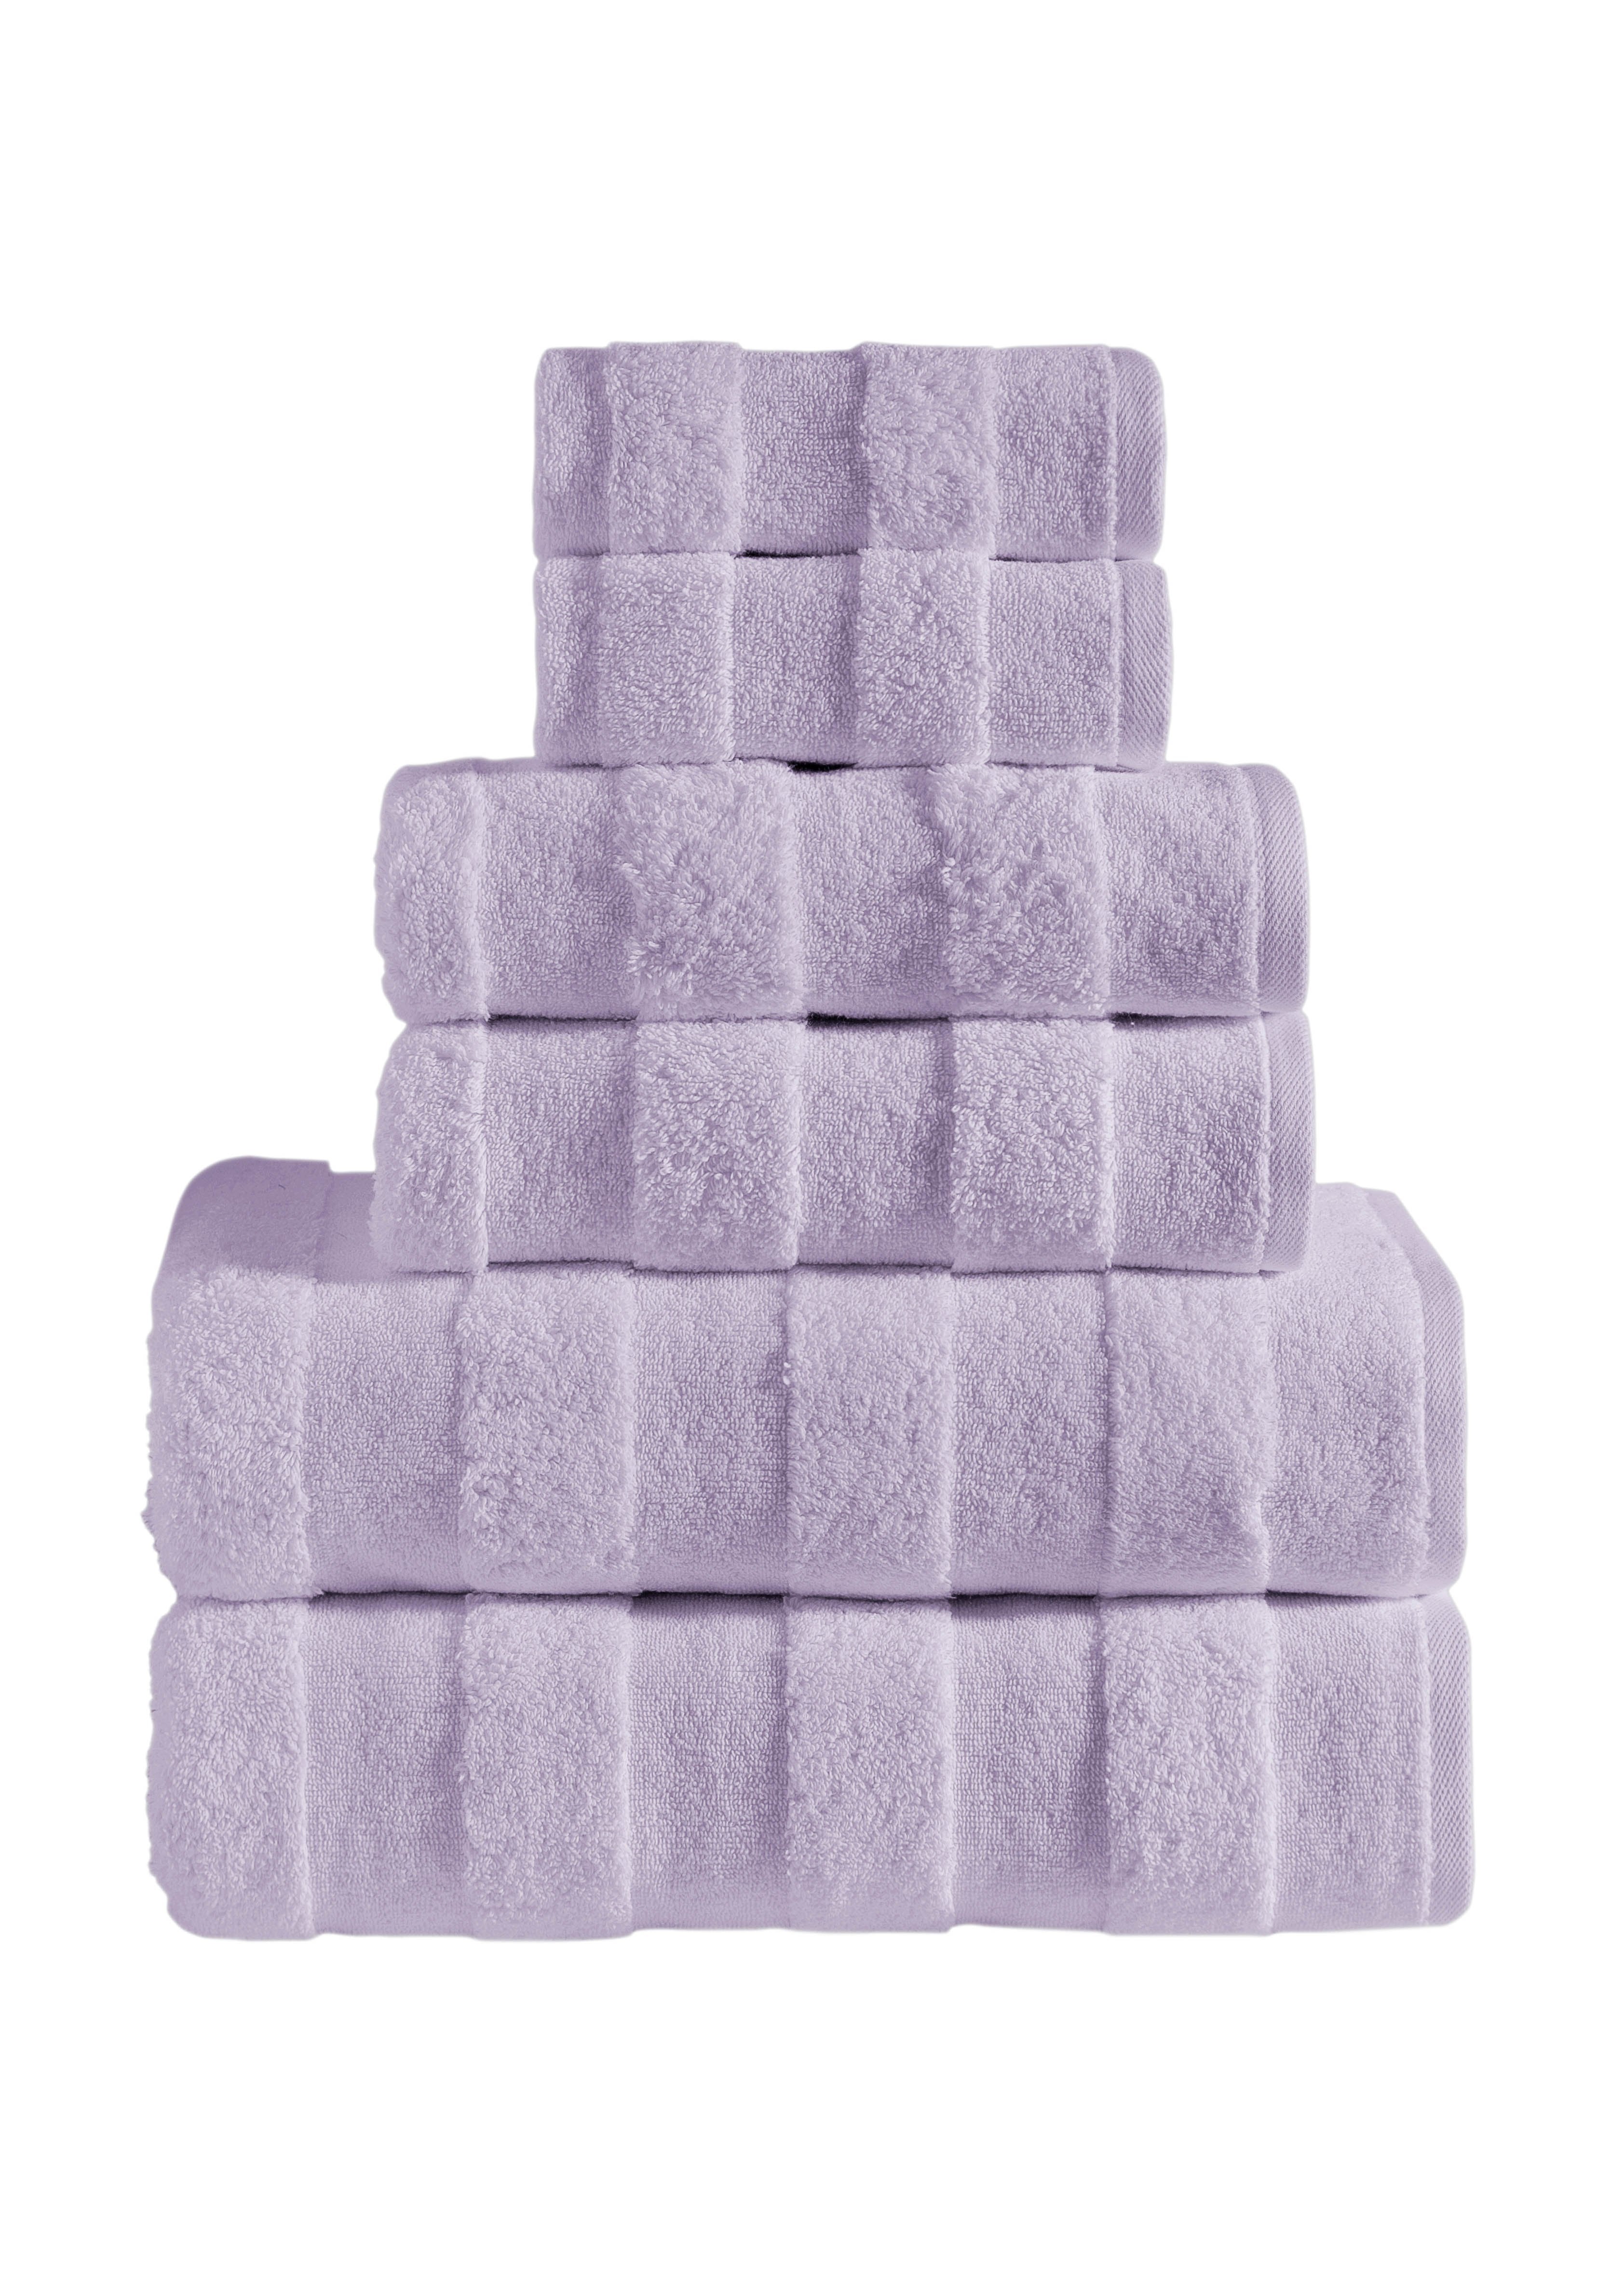 Apogee Collection Luxury 6 PK Towels Set - Orchid By SaaSoh